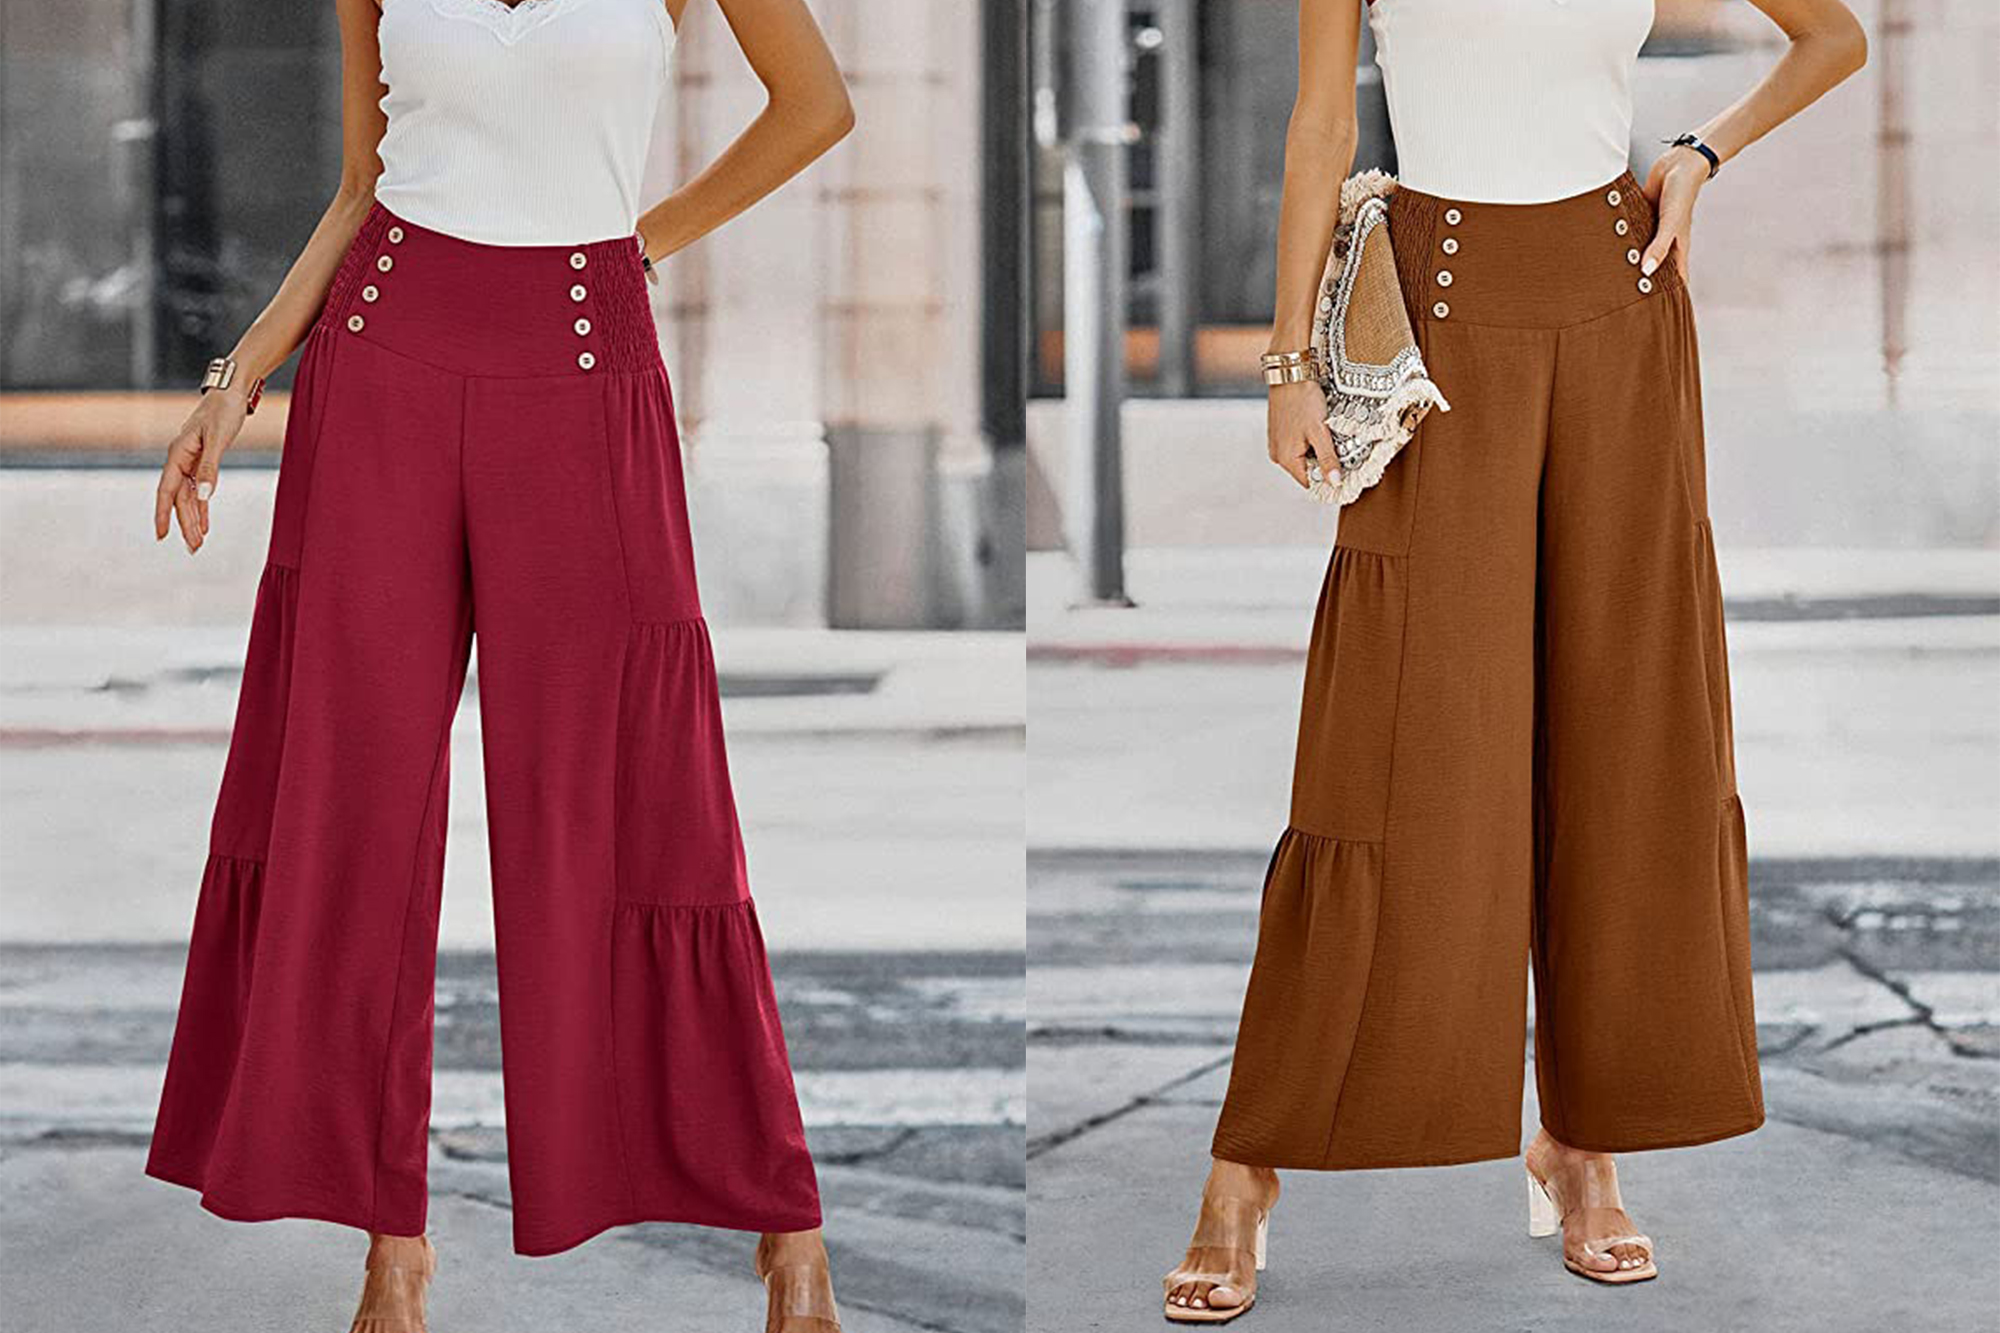 Solid Color Cotton Palazzo Pants in Bright Red PP0076 010000 12